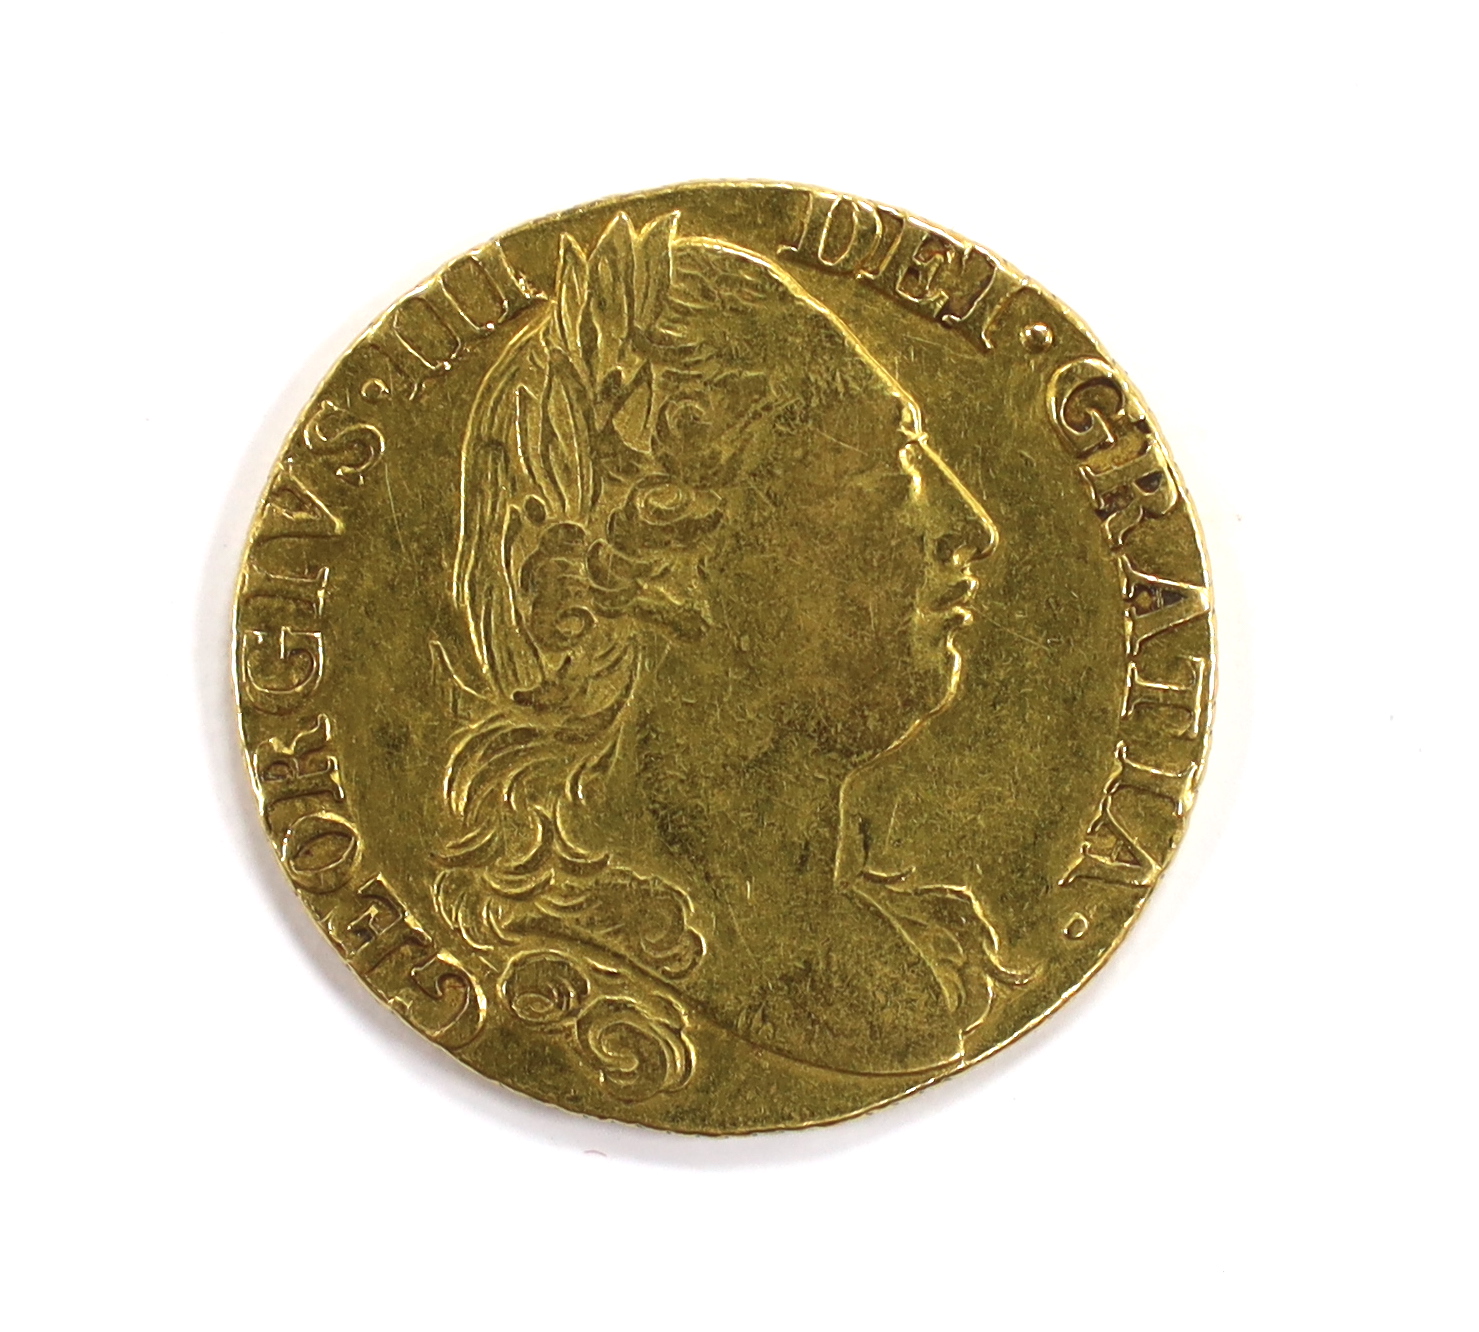 British gold coins - A George III gold guinea, 1779, fourth head, VF, (S3728)Provenance - bought - Image 2 of 3